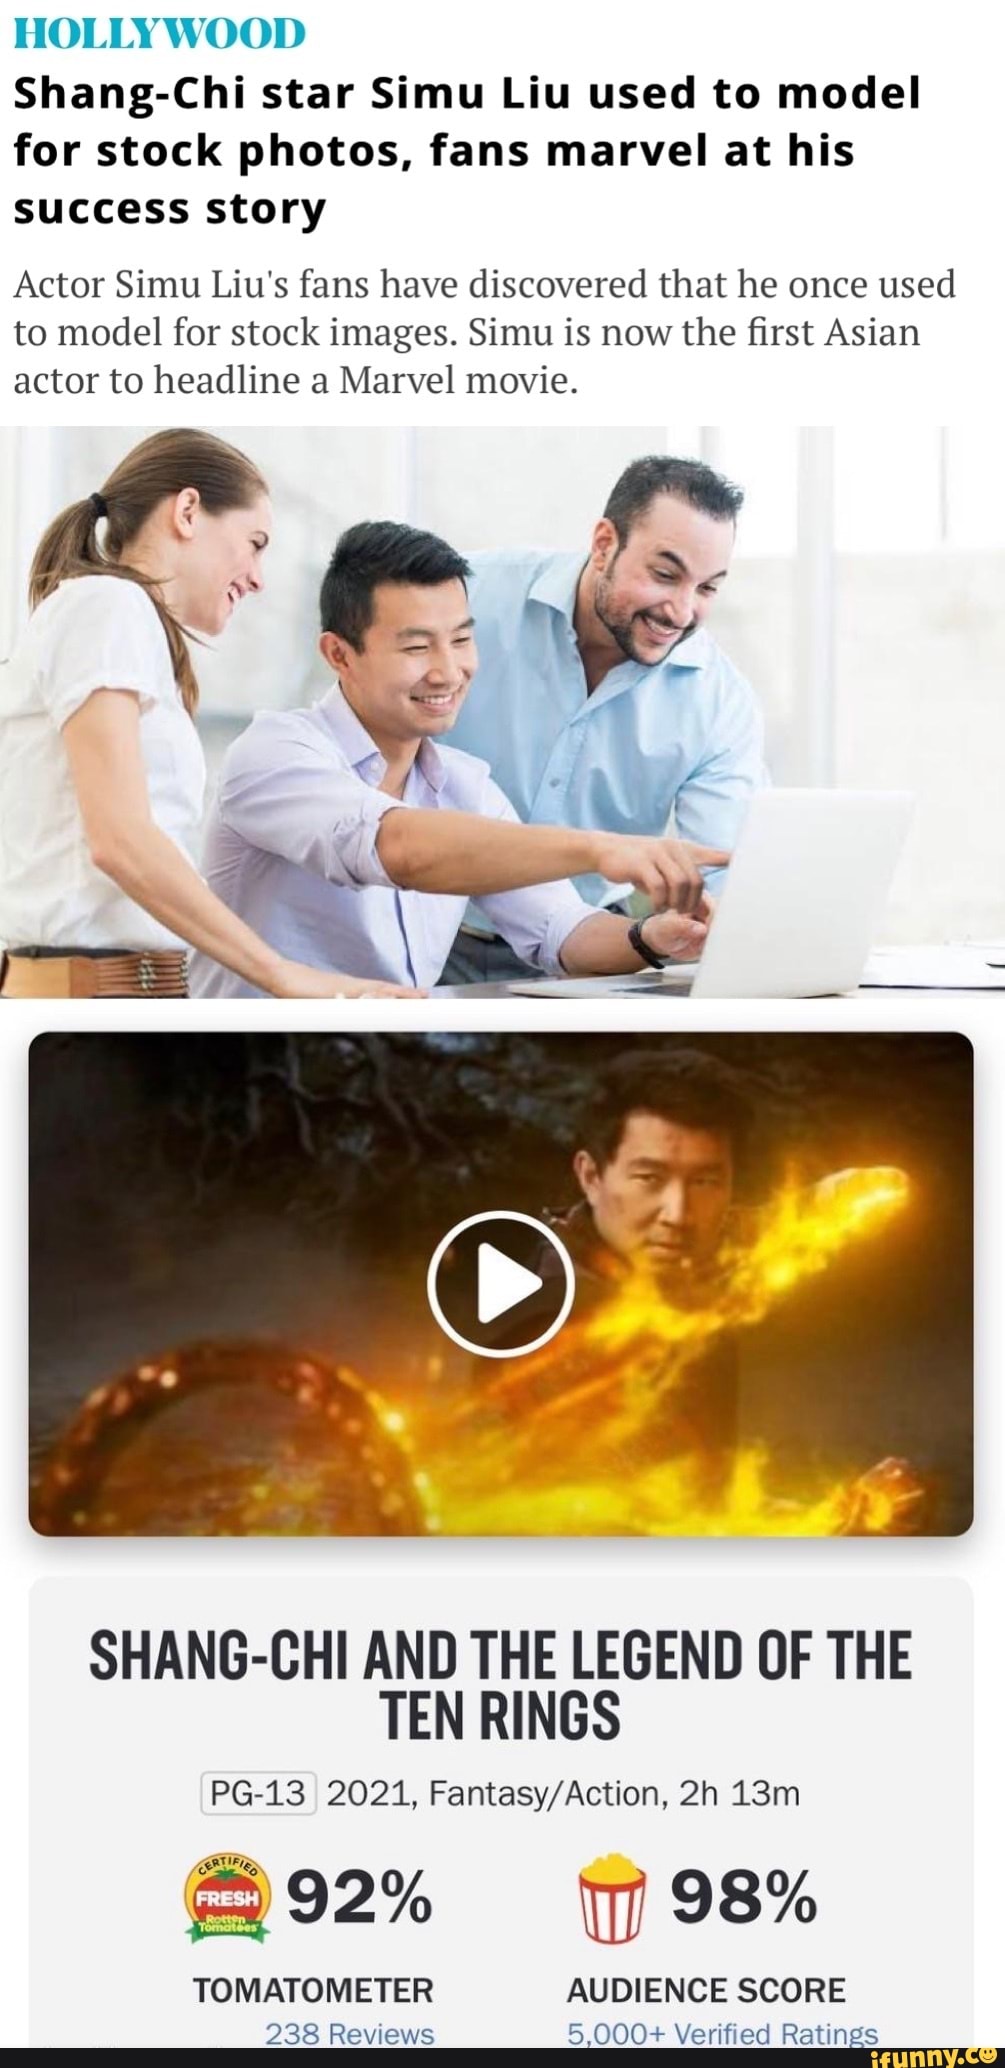 Simu Liu Used To Model For Stock Images